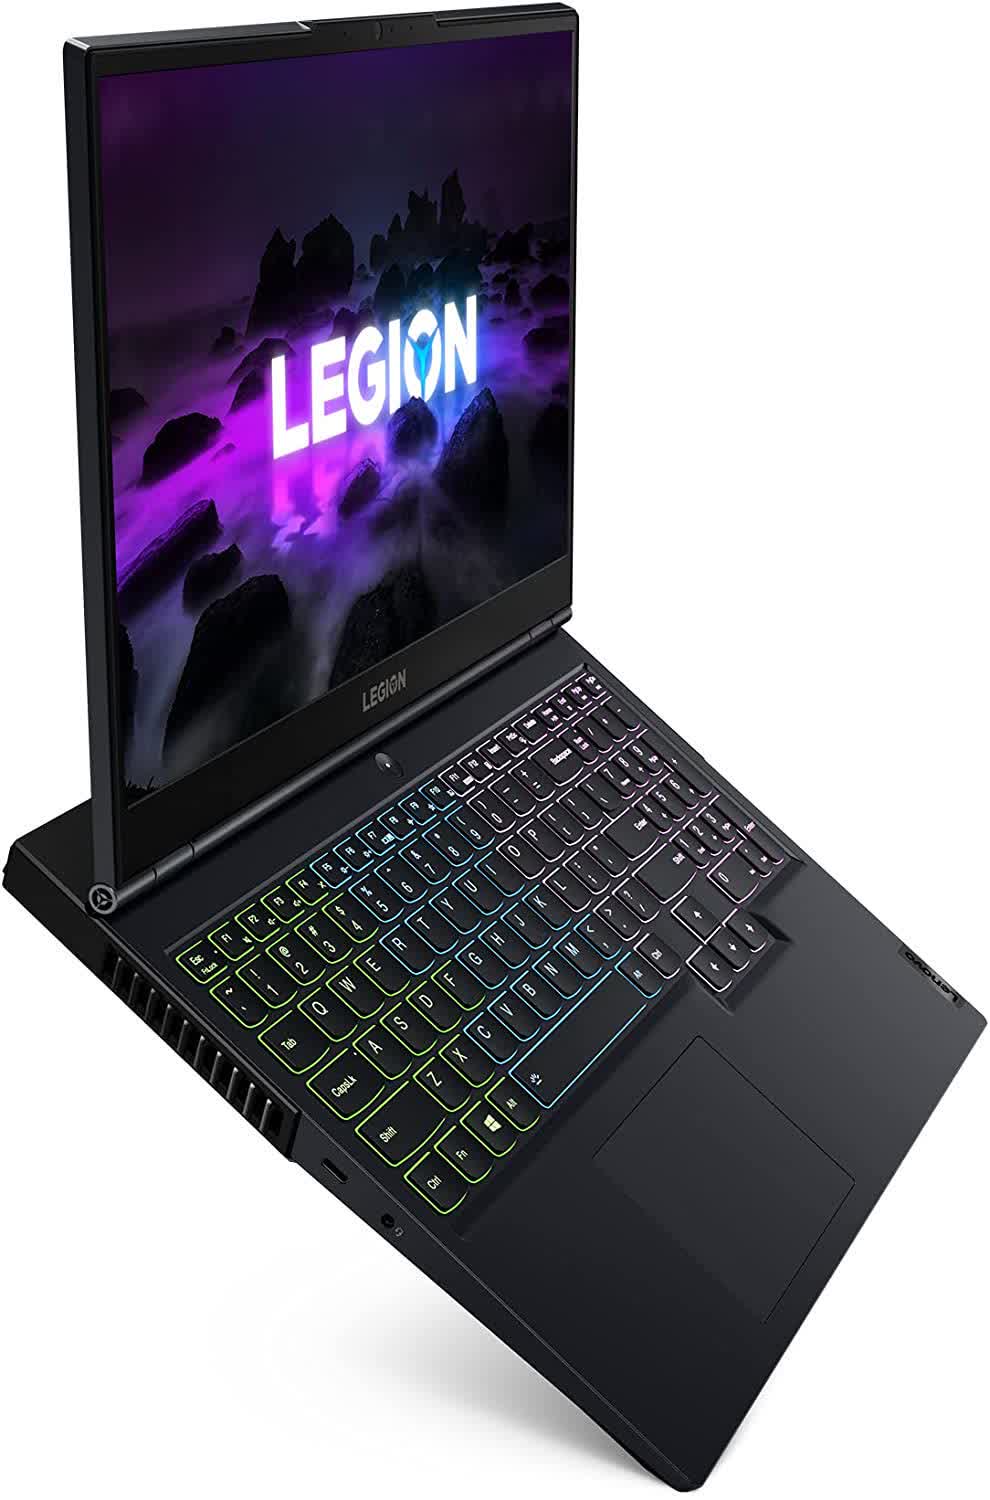 Lenovo's Legion 5 sporting an RTX 3060 is $899 at the moment thumbnail